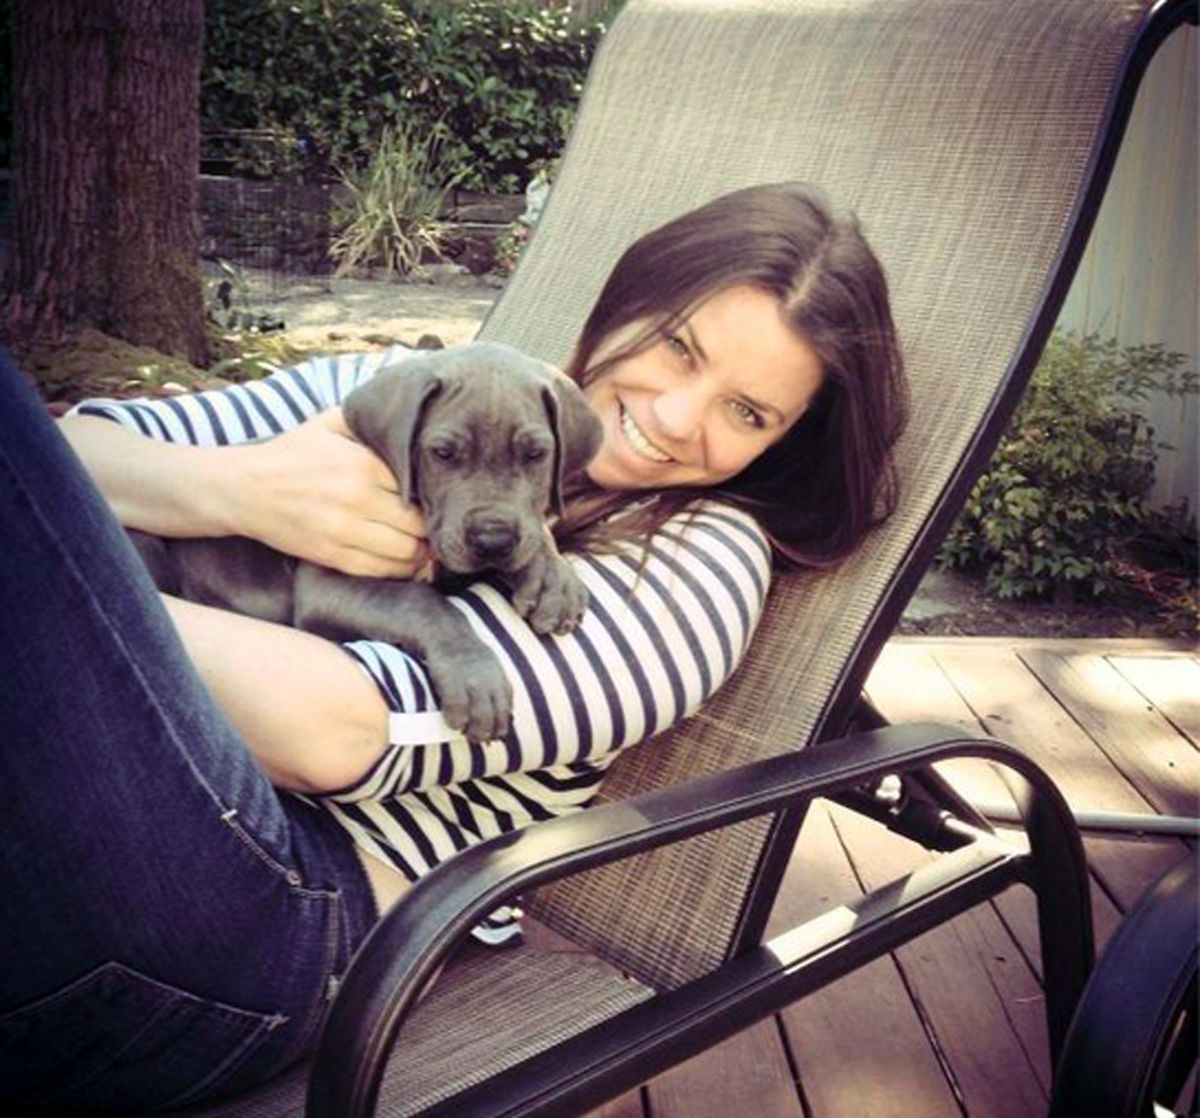 This undated photo provided by the Maynard family shows Brittany Maynard. The terminally ill California woman moved to Portland, Ore., to take advantage of Oregon's Death with Dignity Act, which was established in the 1990s.  Maynard wants to pass a similar law in California and has turned to advocacy in her final days. (AP Photo/Maynard Family) (AP)